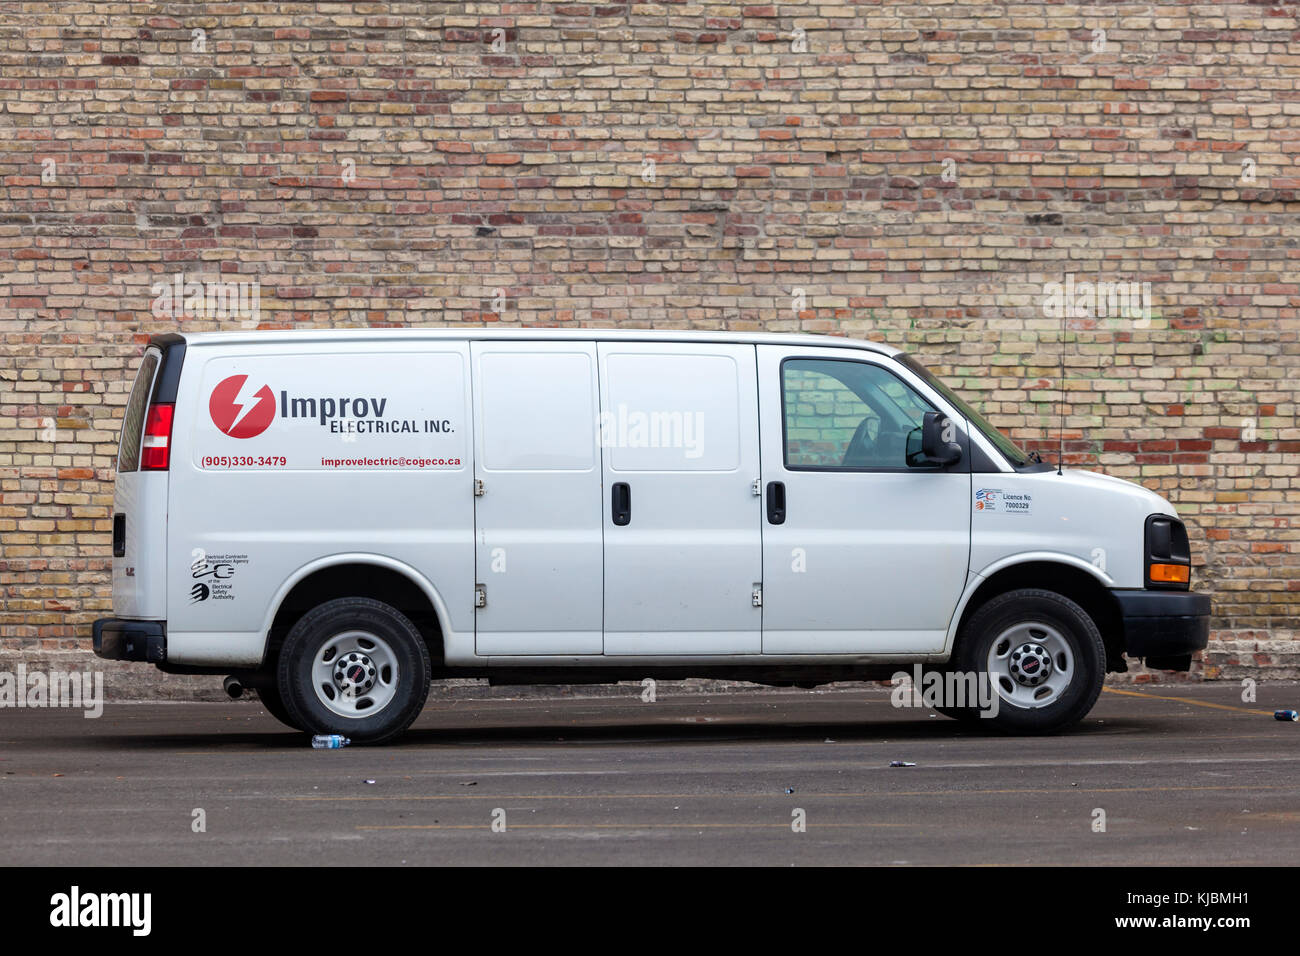 Toronto, Canada - Oct 14, 2017: A white GMC cargo van parked on a parking lot in the city of Toronto, Canada Stock Photo